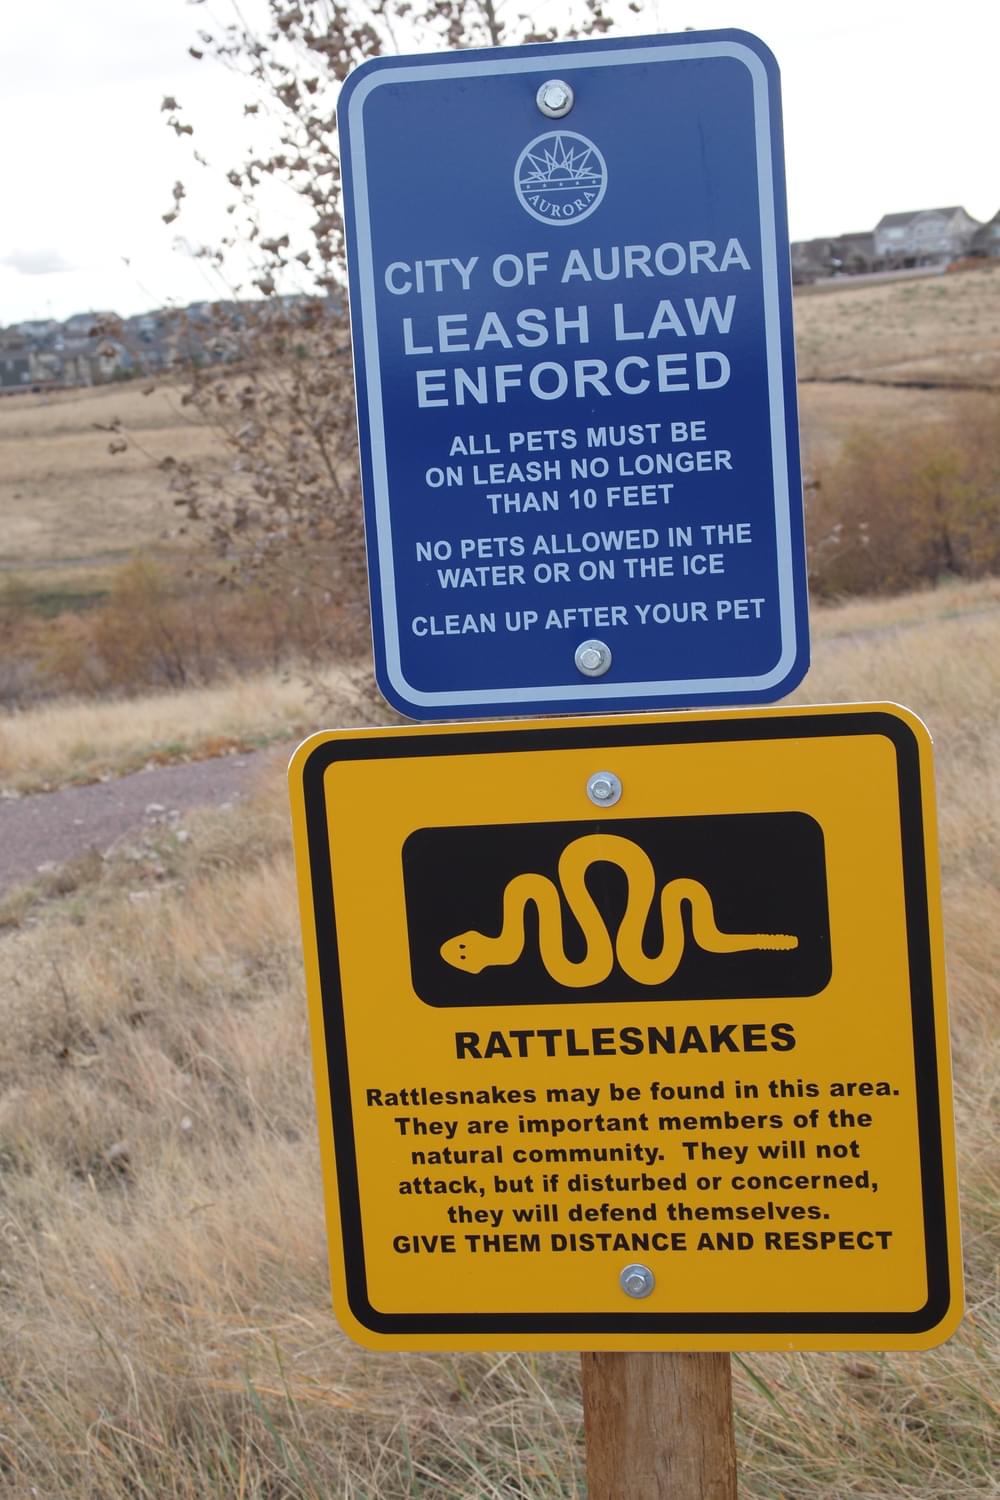 Warning about rattlesnakes accompanies dog regulations sign! More incentive to pet owners to use the leash at Aurora Reservoir Park, Colorado